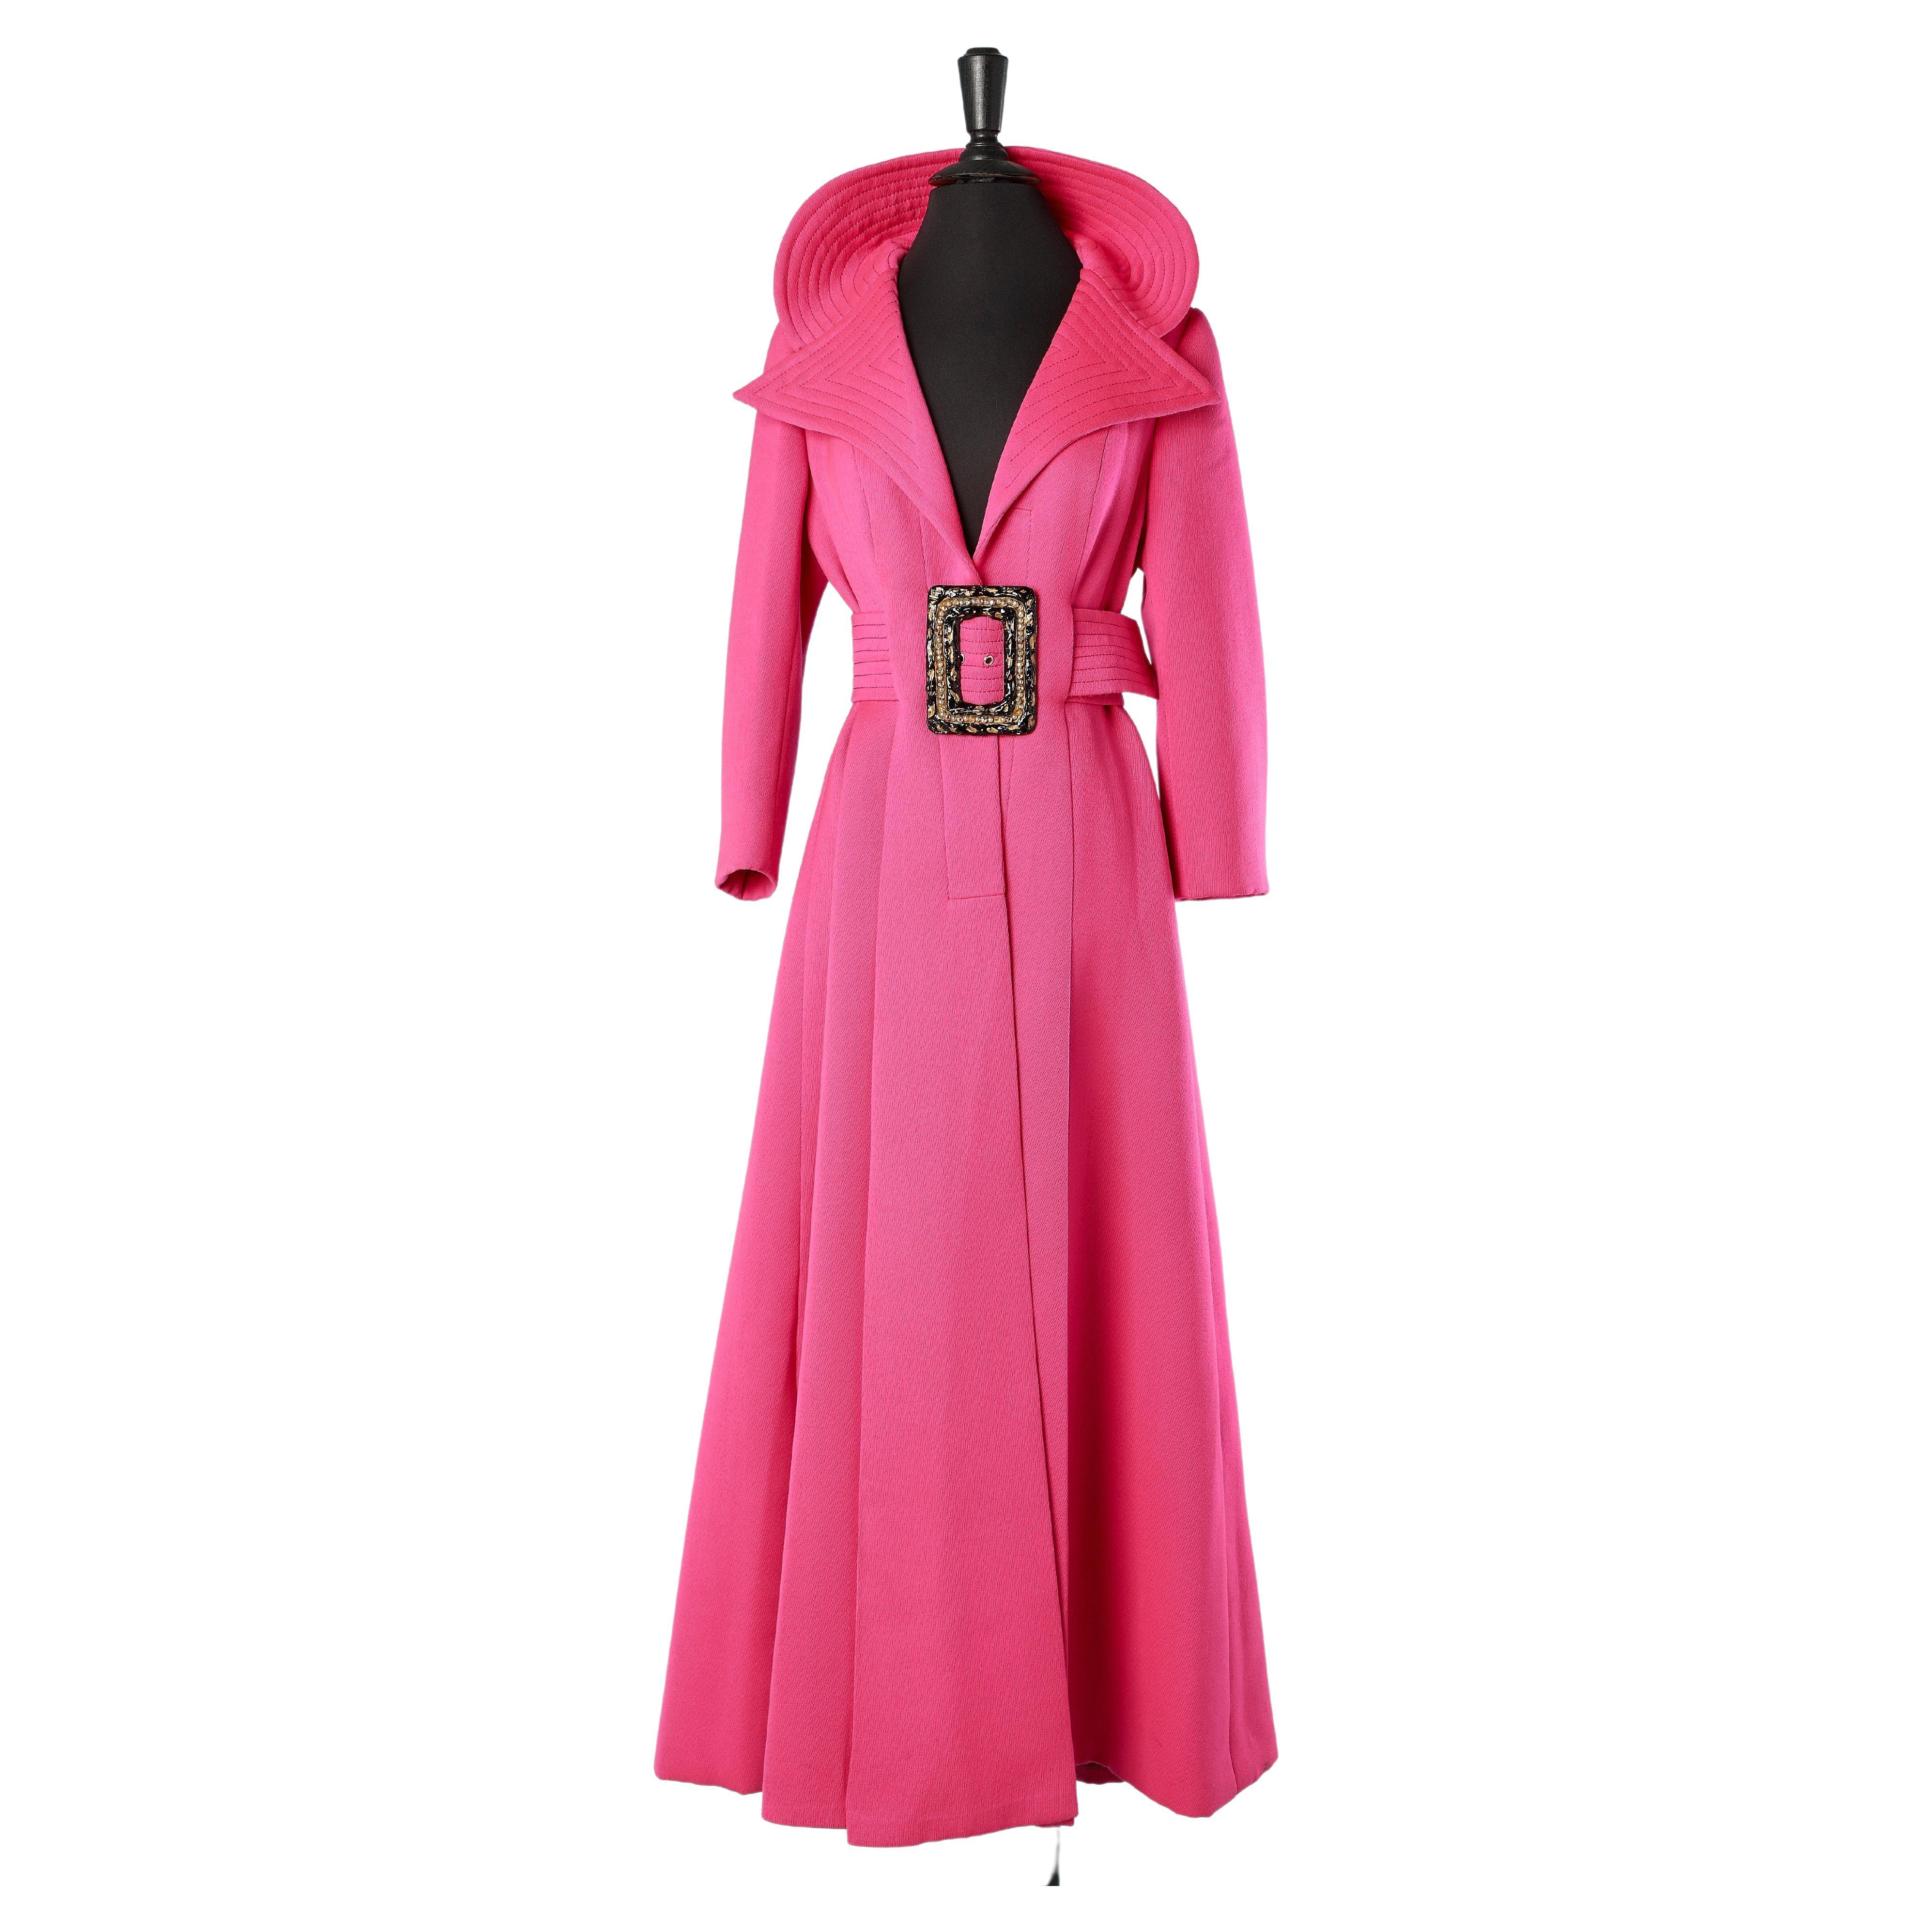 Shocking pink long evening coat with beaded buckle Circa 1970's 